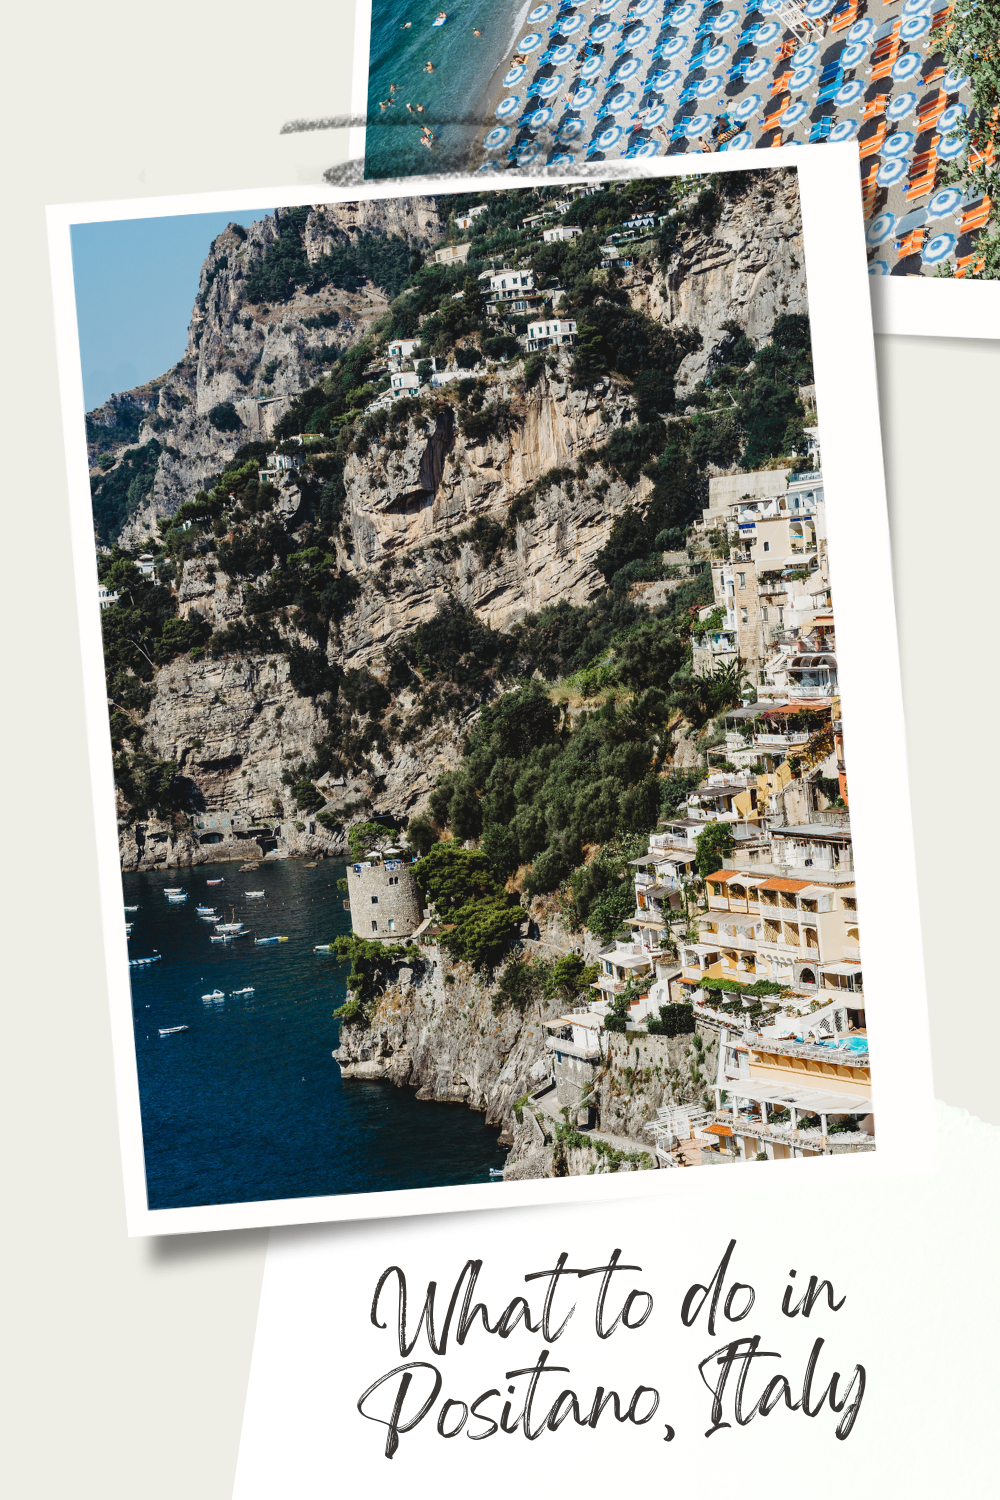 The Amalfi Coast is a dream travel destination. The houses built into the cliffs are like something on a postcard. It really is as beautiful as all the photos. Visiting the Amalfi Coast has been on my bucket list for years and we finally made the trip for our honeymoon! I have put together a list of what to do in Postiano, Italy to help you plan a trip of your own!